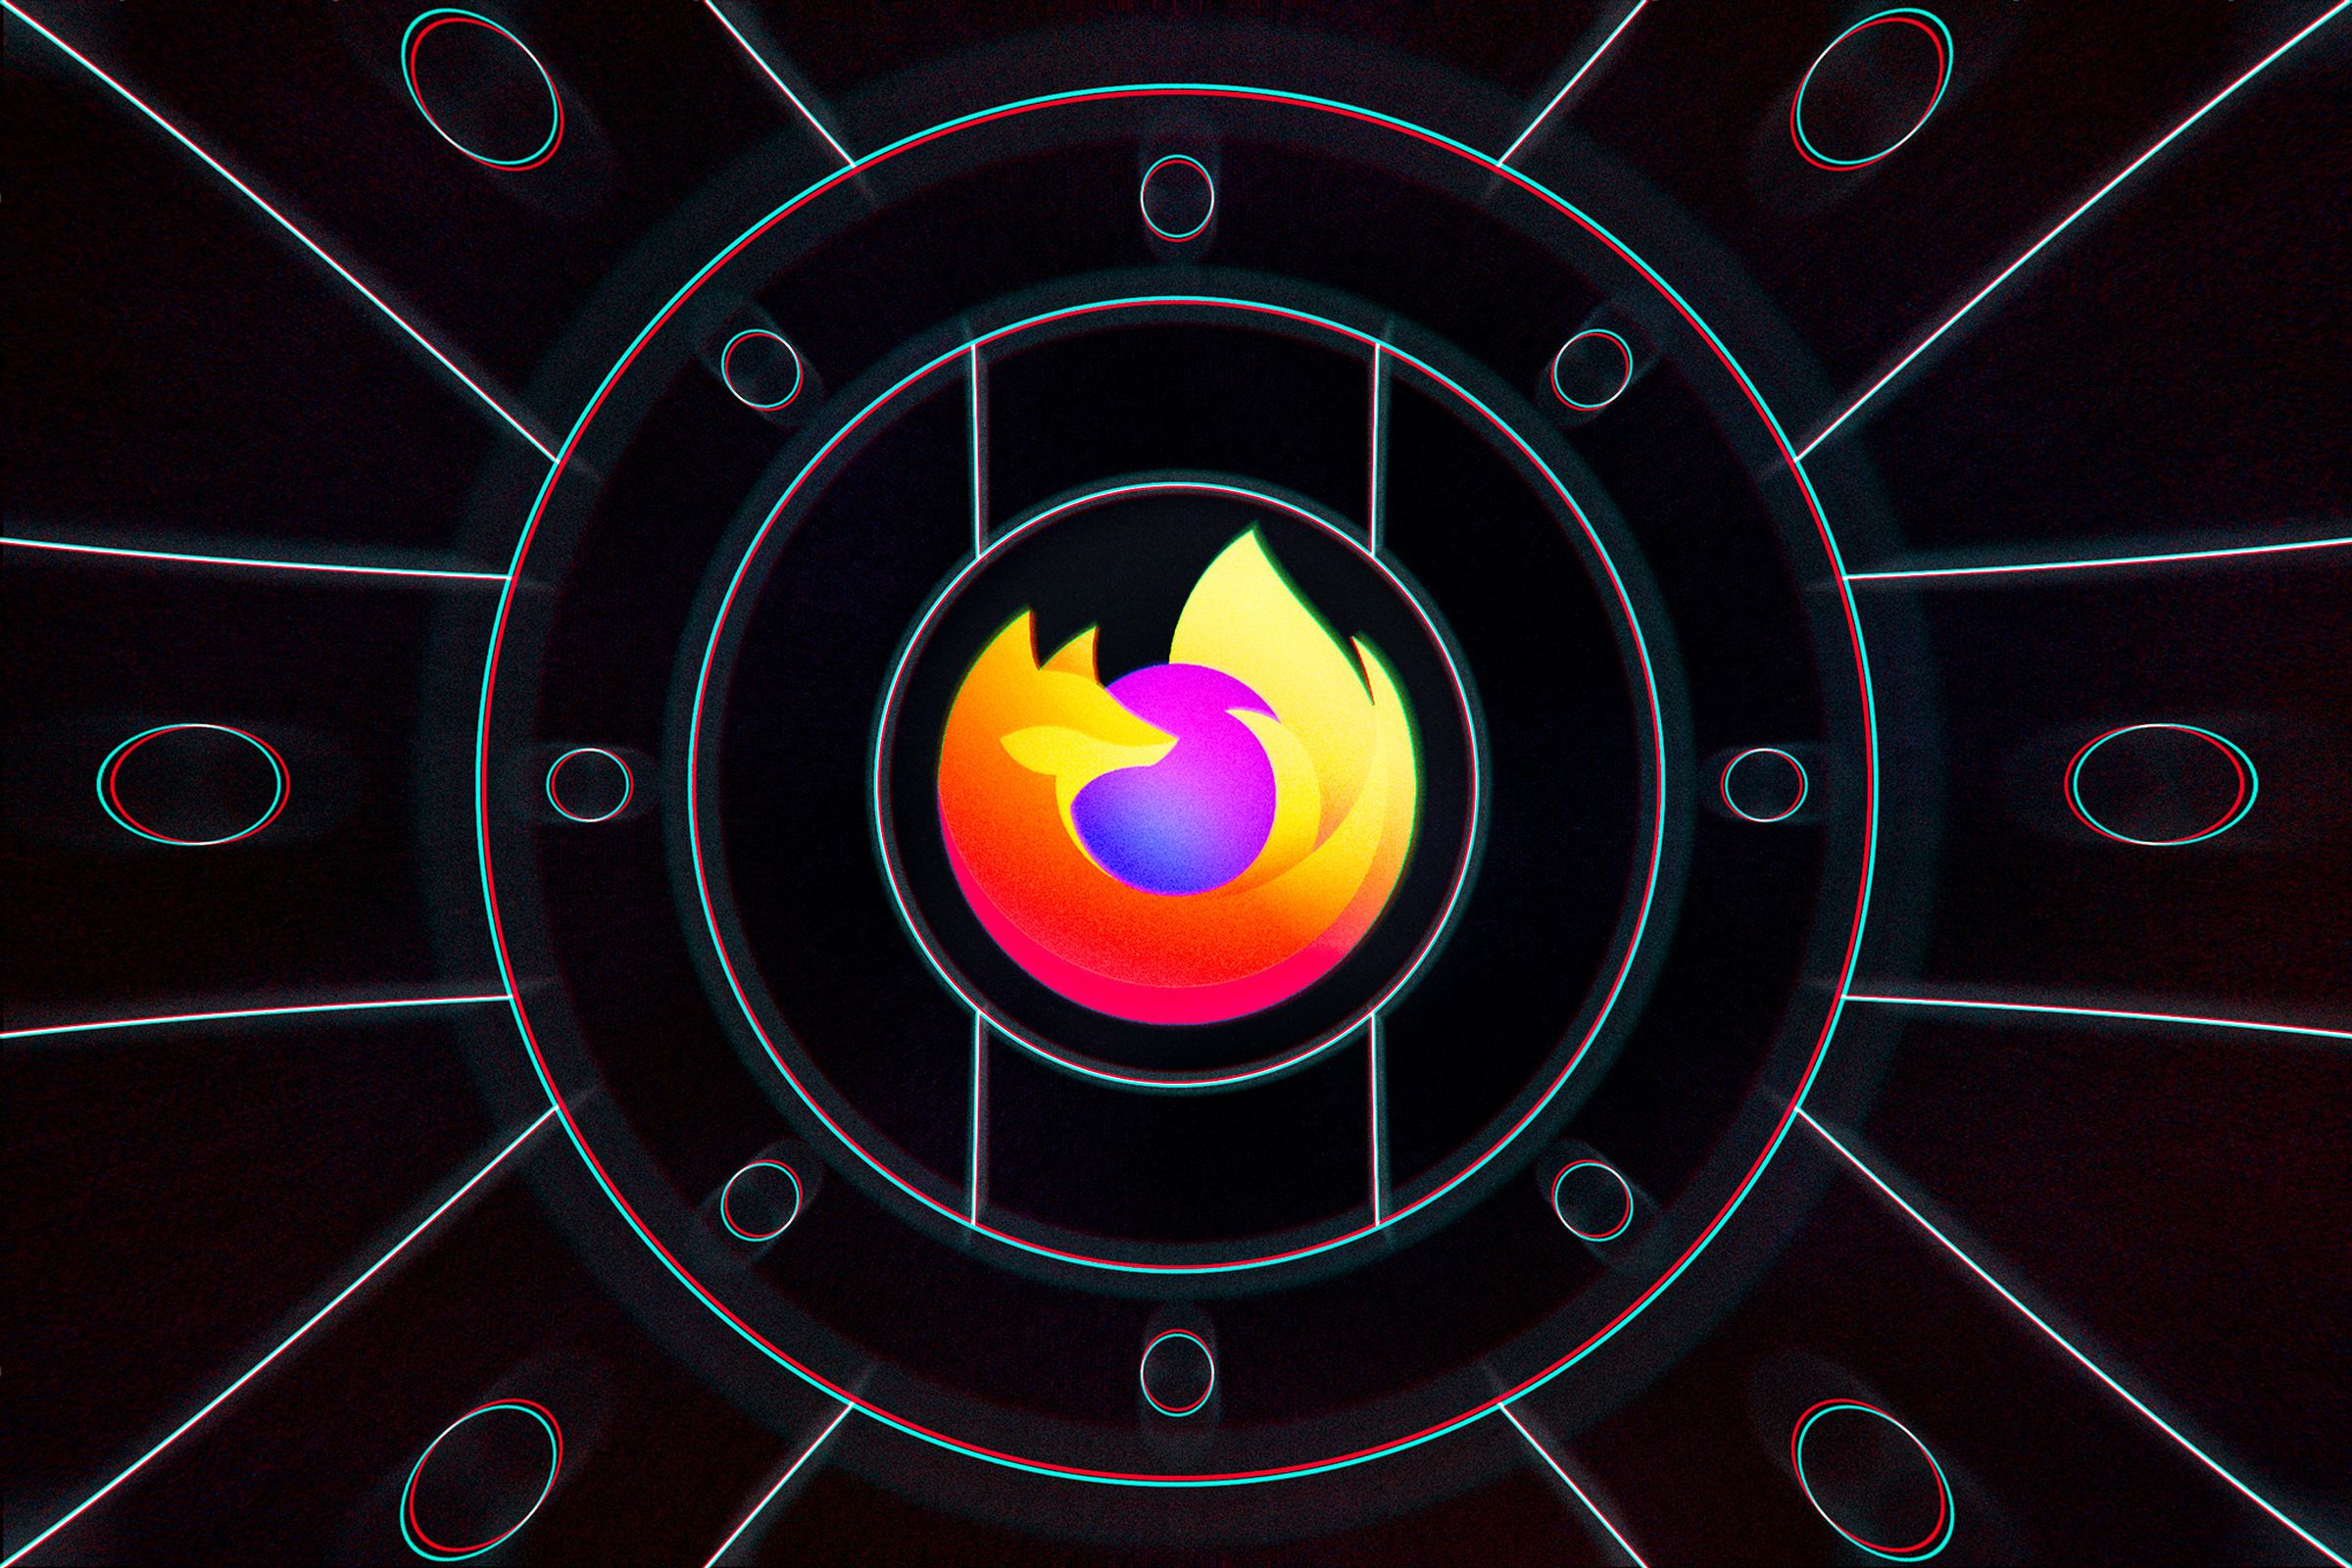 The Firefox logo on a black background